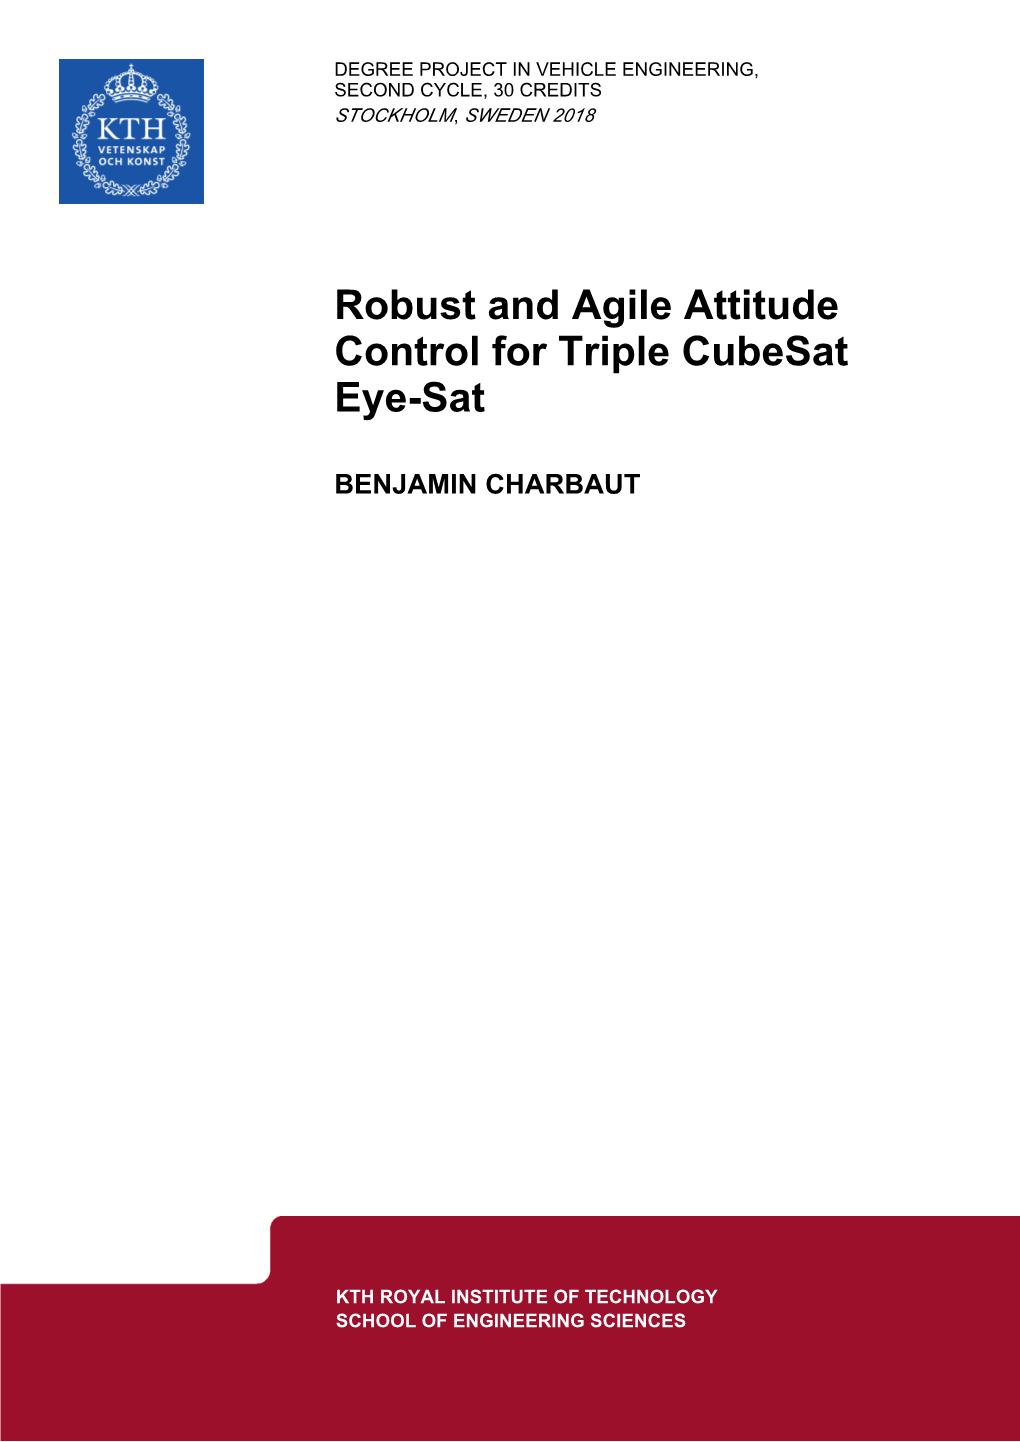 Robust and Agile Attitude Control for Triple Cubesat Eye-Sat